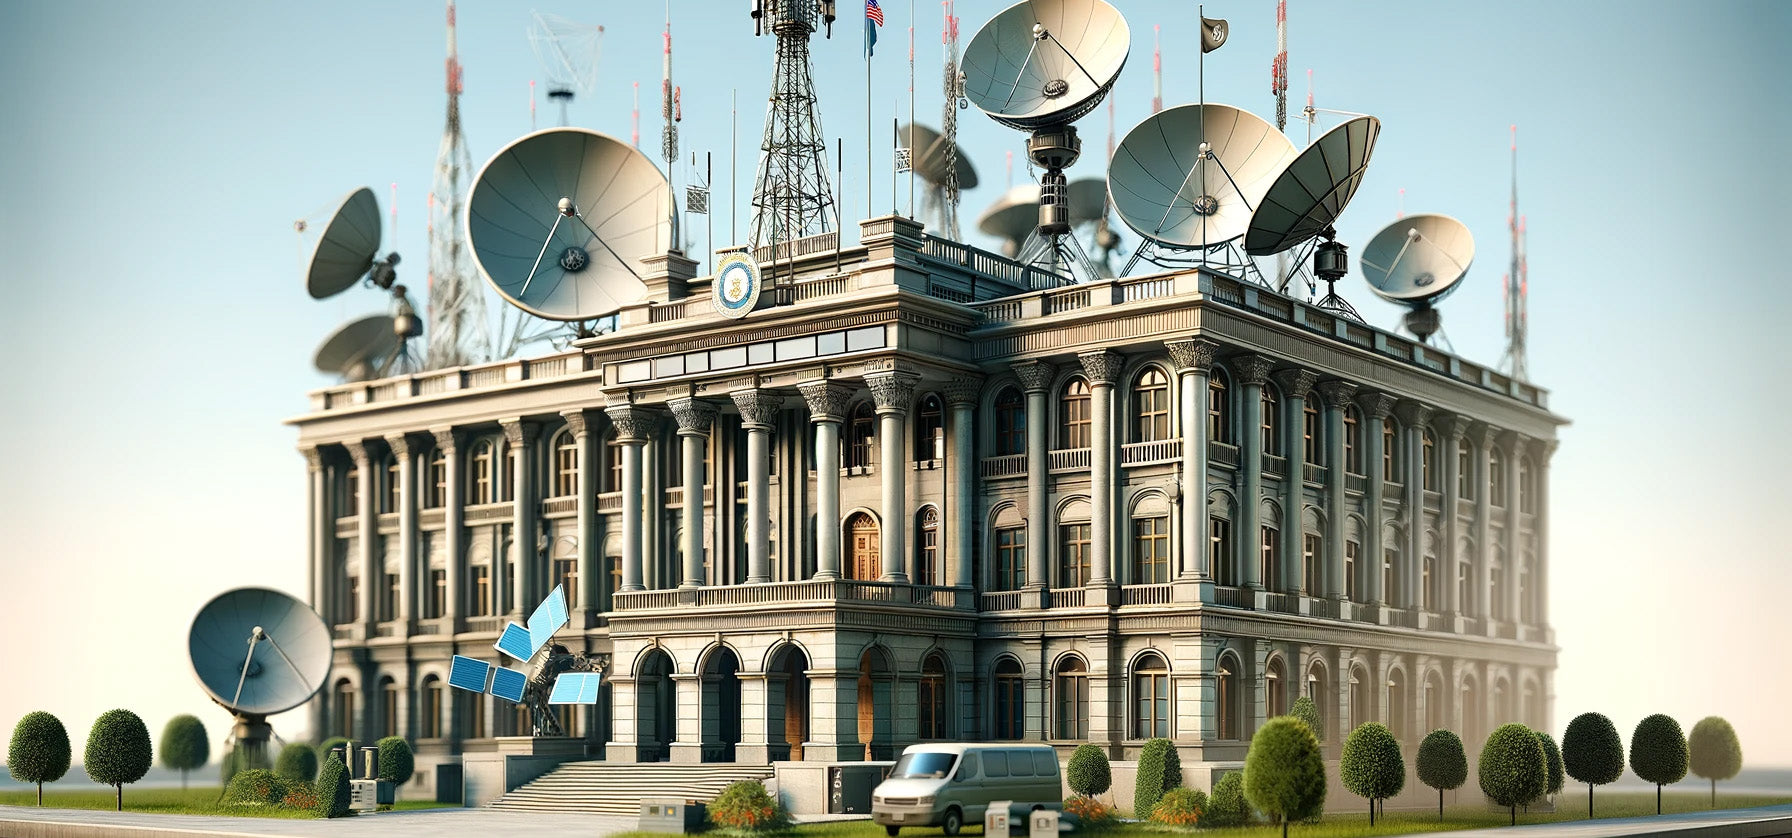 Satellite Networks and Governments